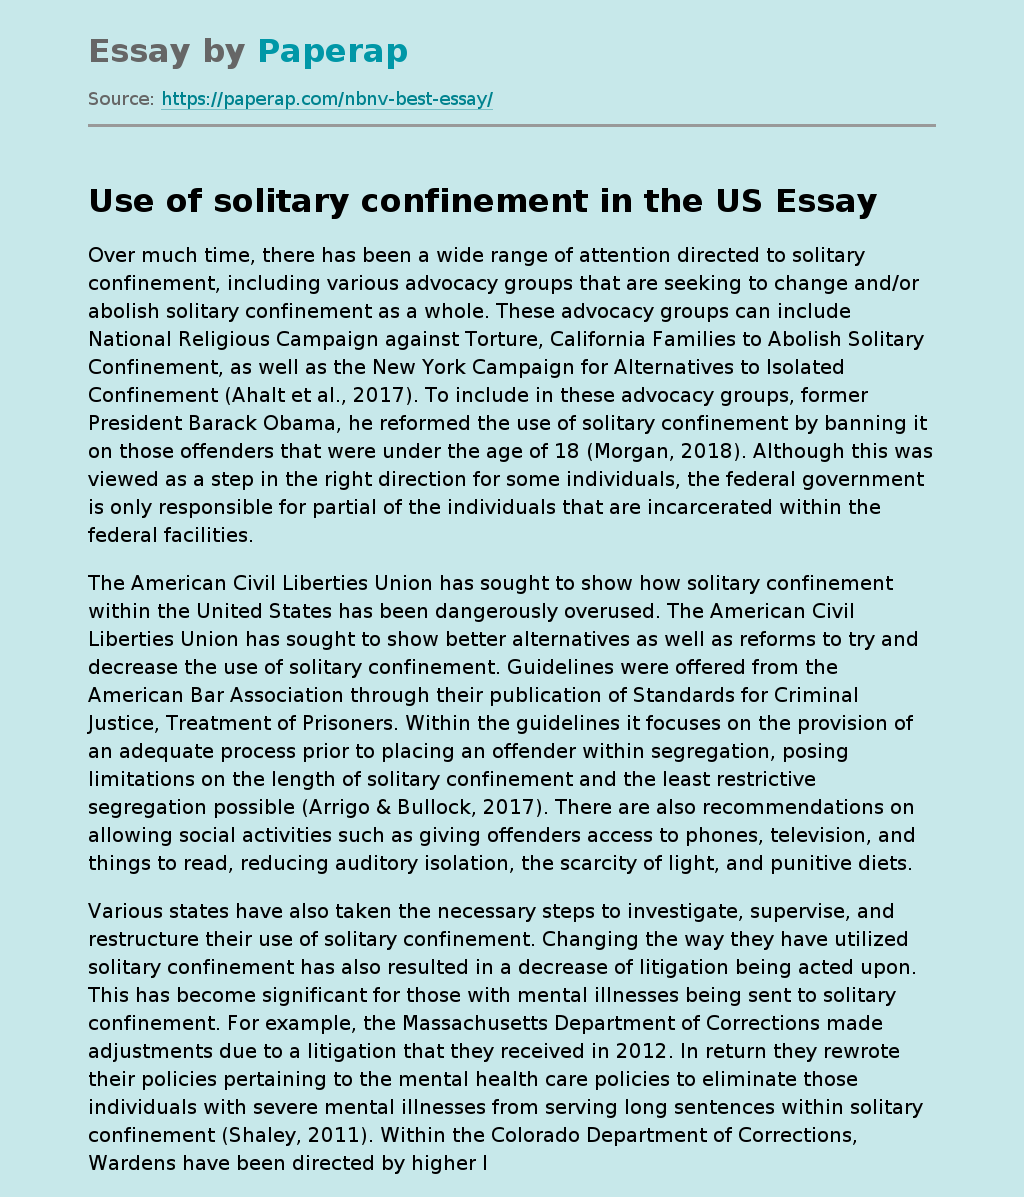 Use of solitary confinement in the US